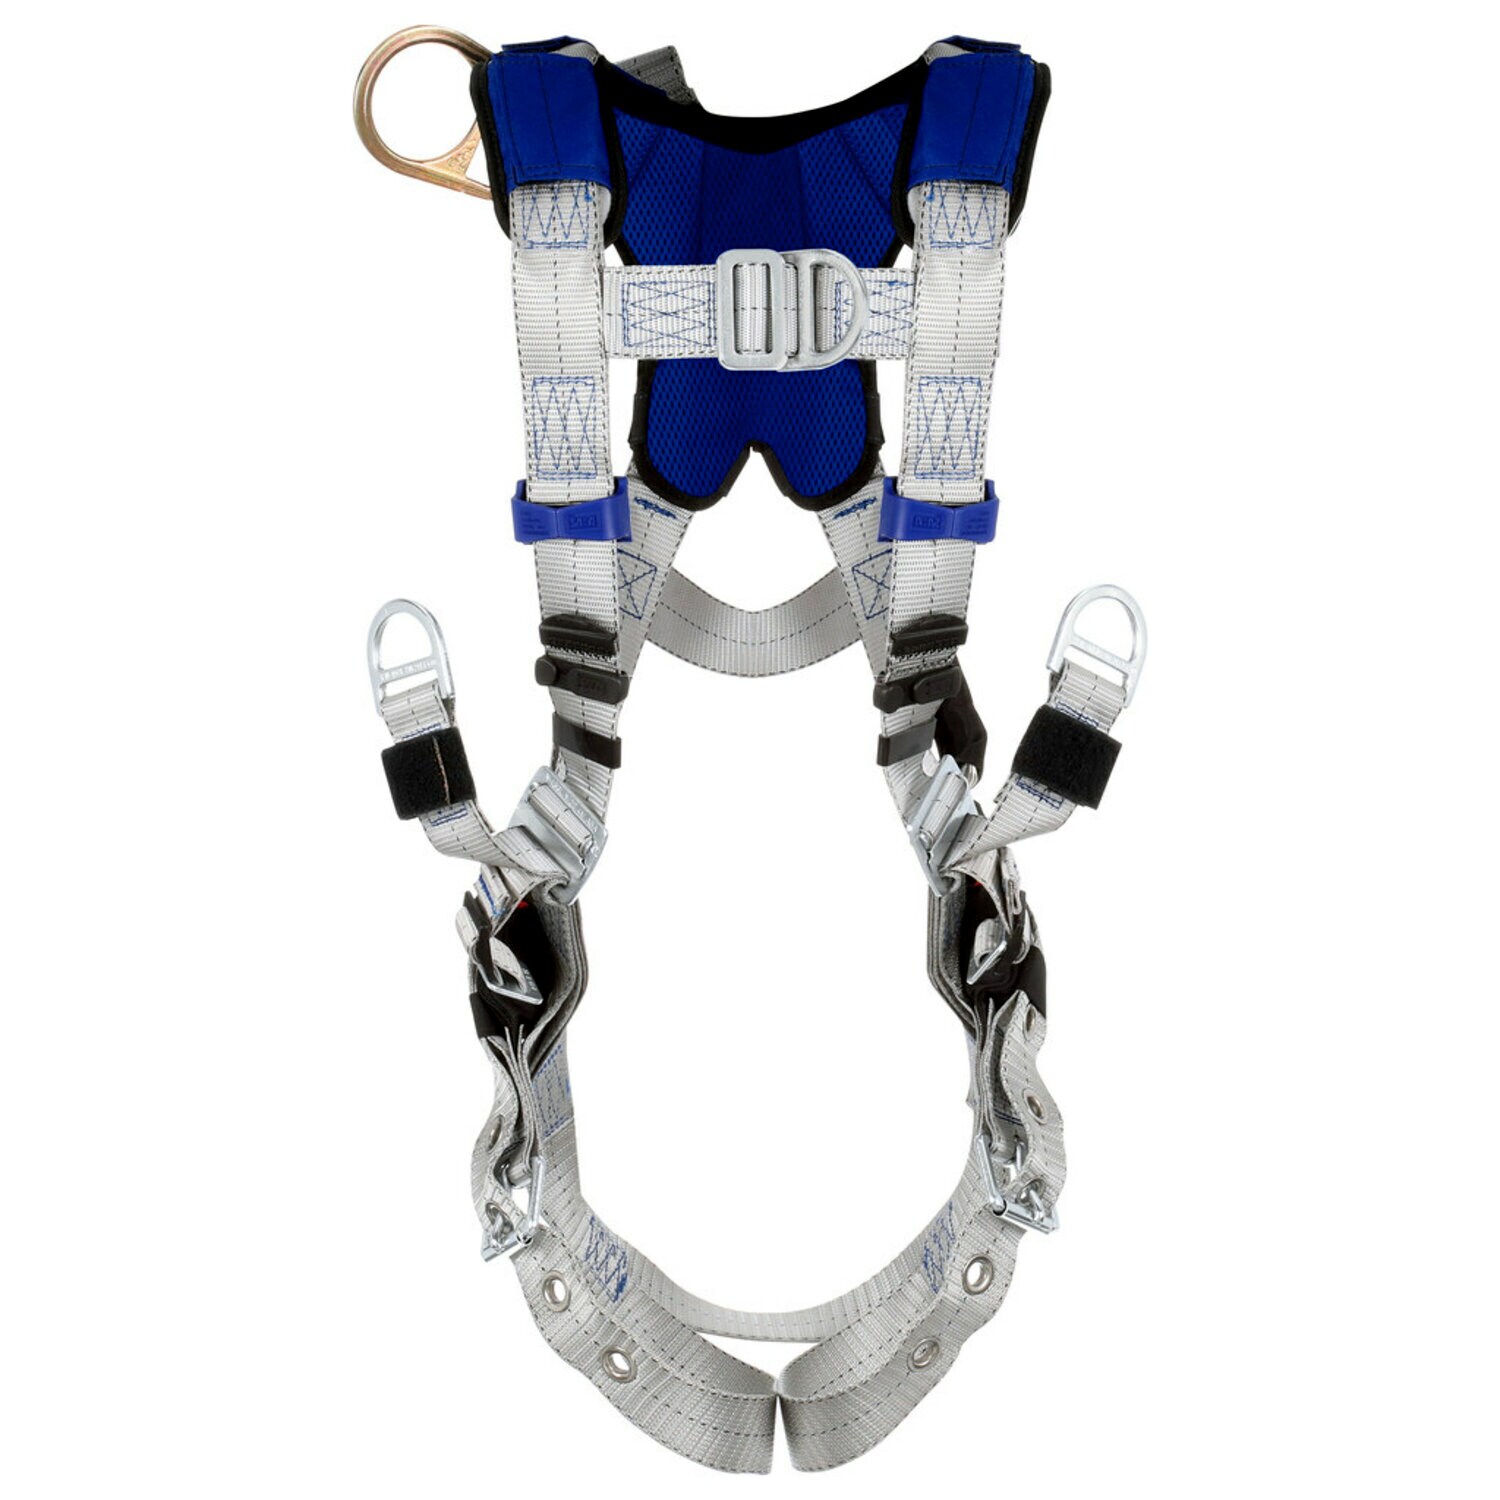 7012817634 - 3M DBI-SALA ExoFit X100 Comfort Oil & Gas Climbing/Positioning/Suspension Safety Harness 1401152, Large